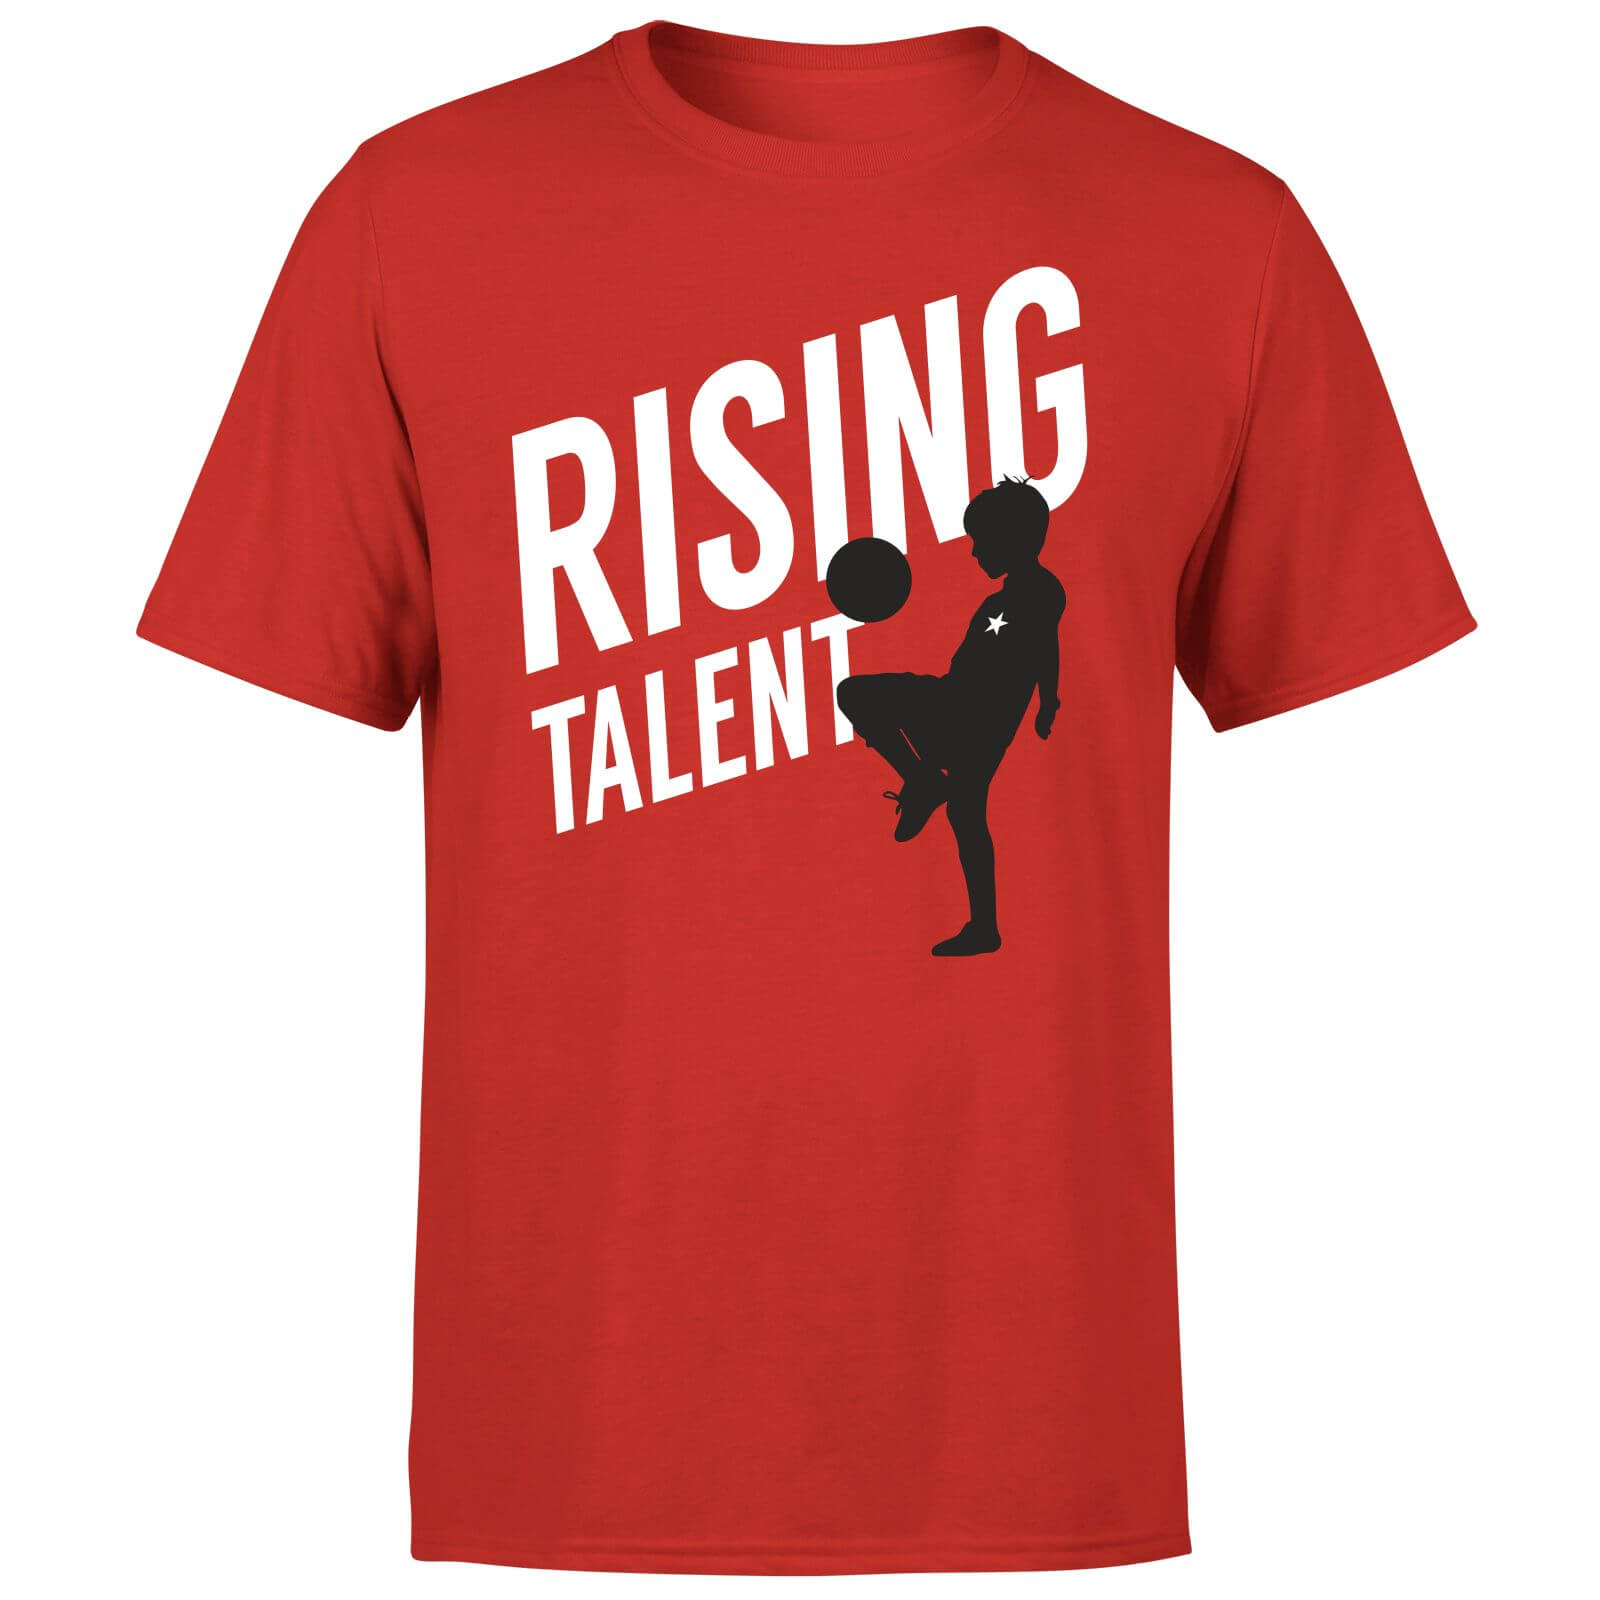 rising talent t-shirt - red - s - red